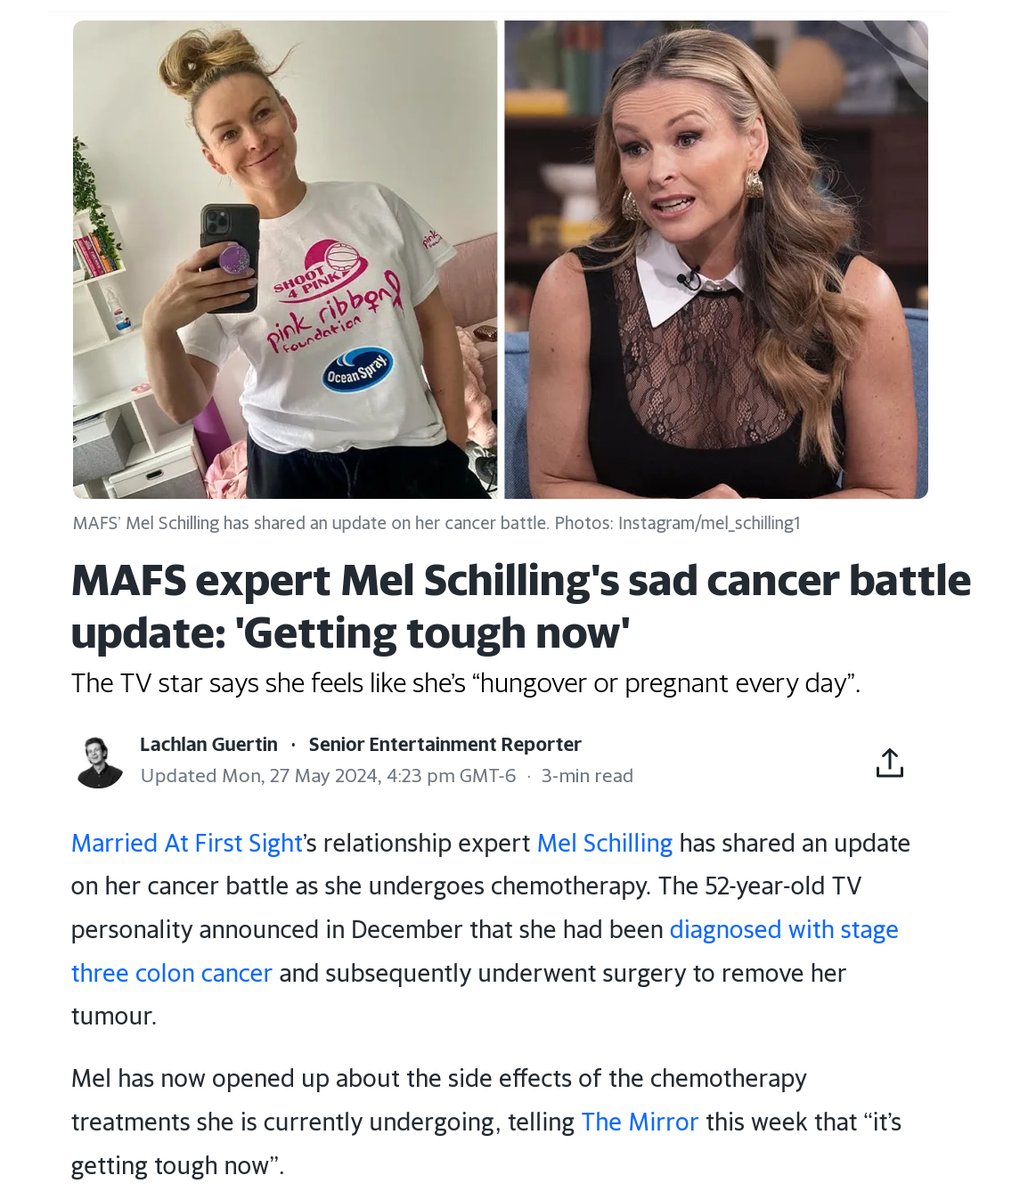 London, UK - TV Star 52 year old Mel Schilling, a relationship expert on 'Married At First Sight', announced in Dec.2023 that she was diagnosed with Stage 3 Colon Cancer. 'side effects of chemo she is currently undergoing...it's getting tough now' COVID-19 mRNA Vaccines cause